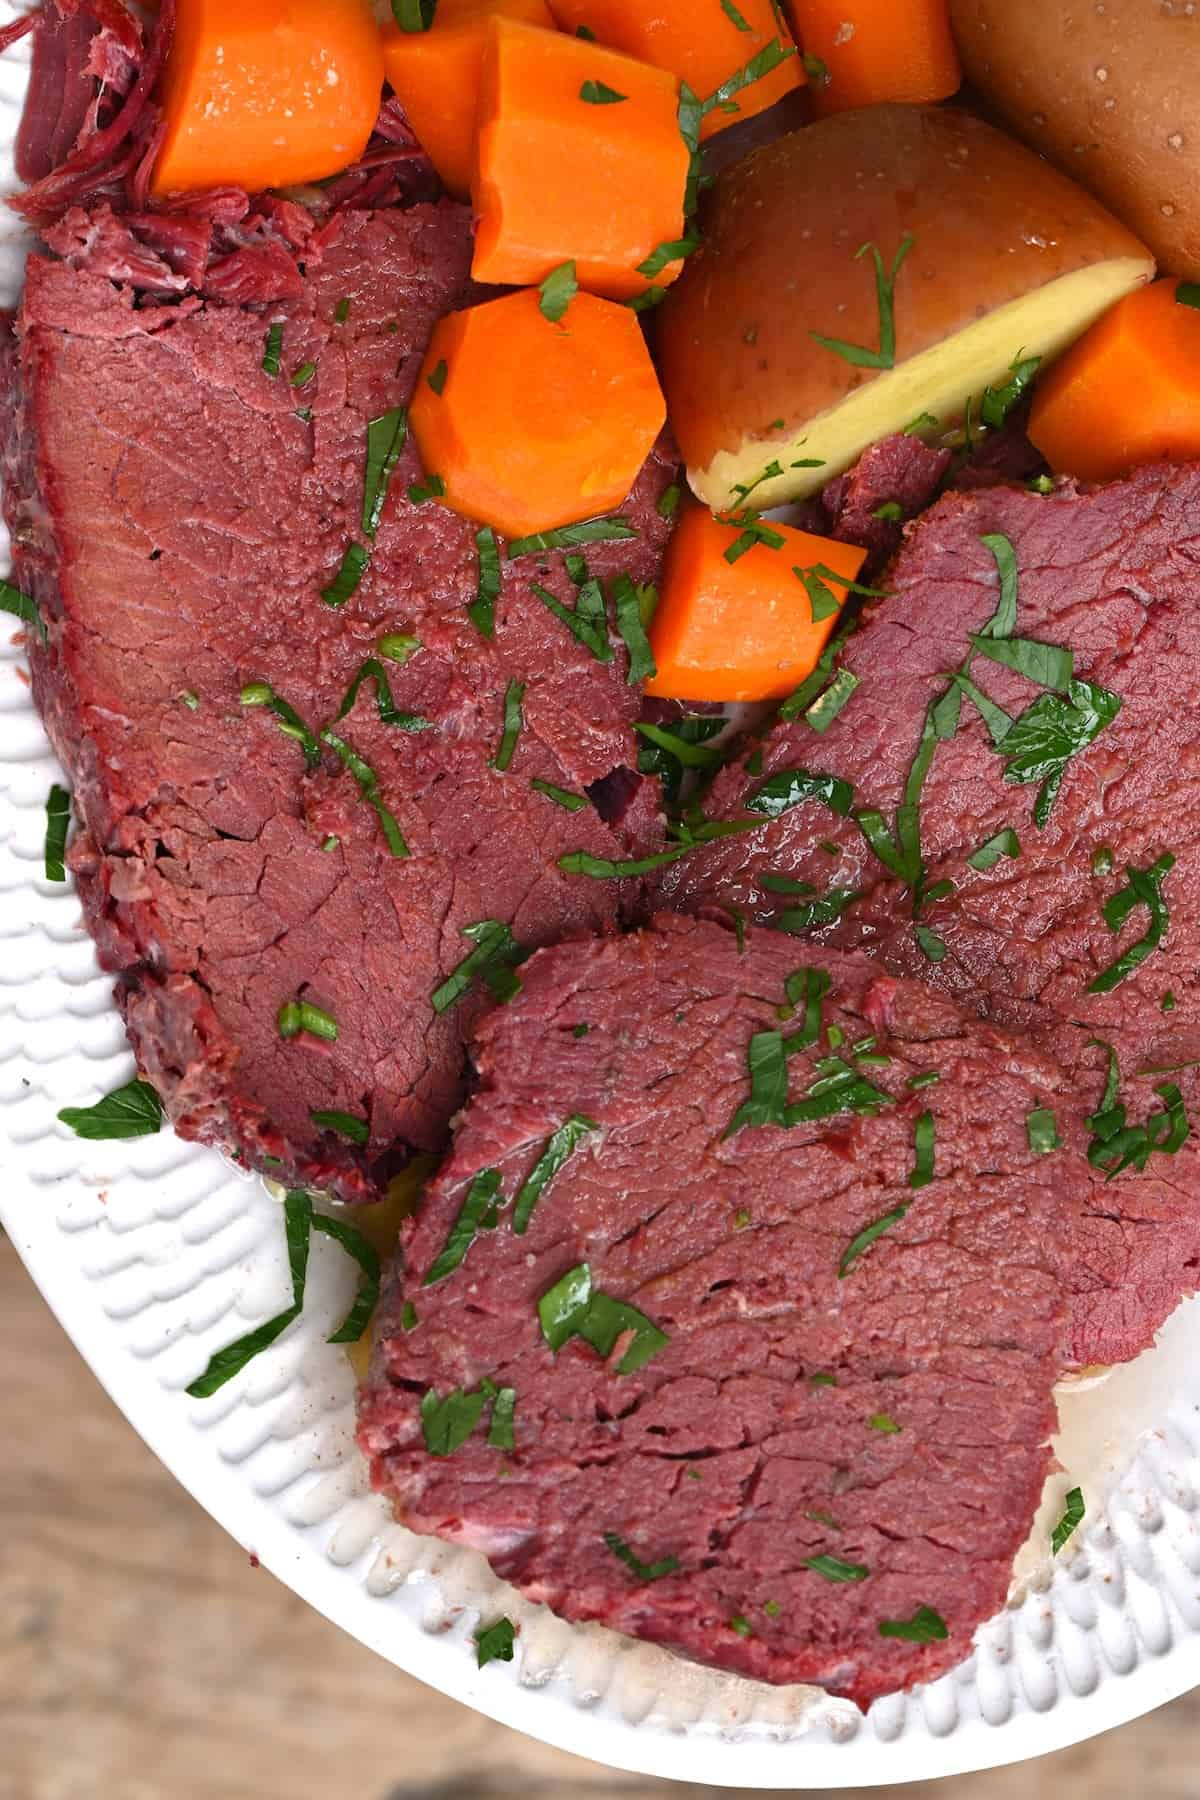 Slices of corned beef cooked with carrots